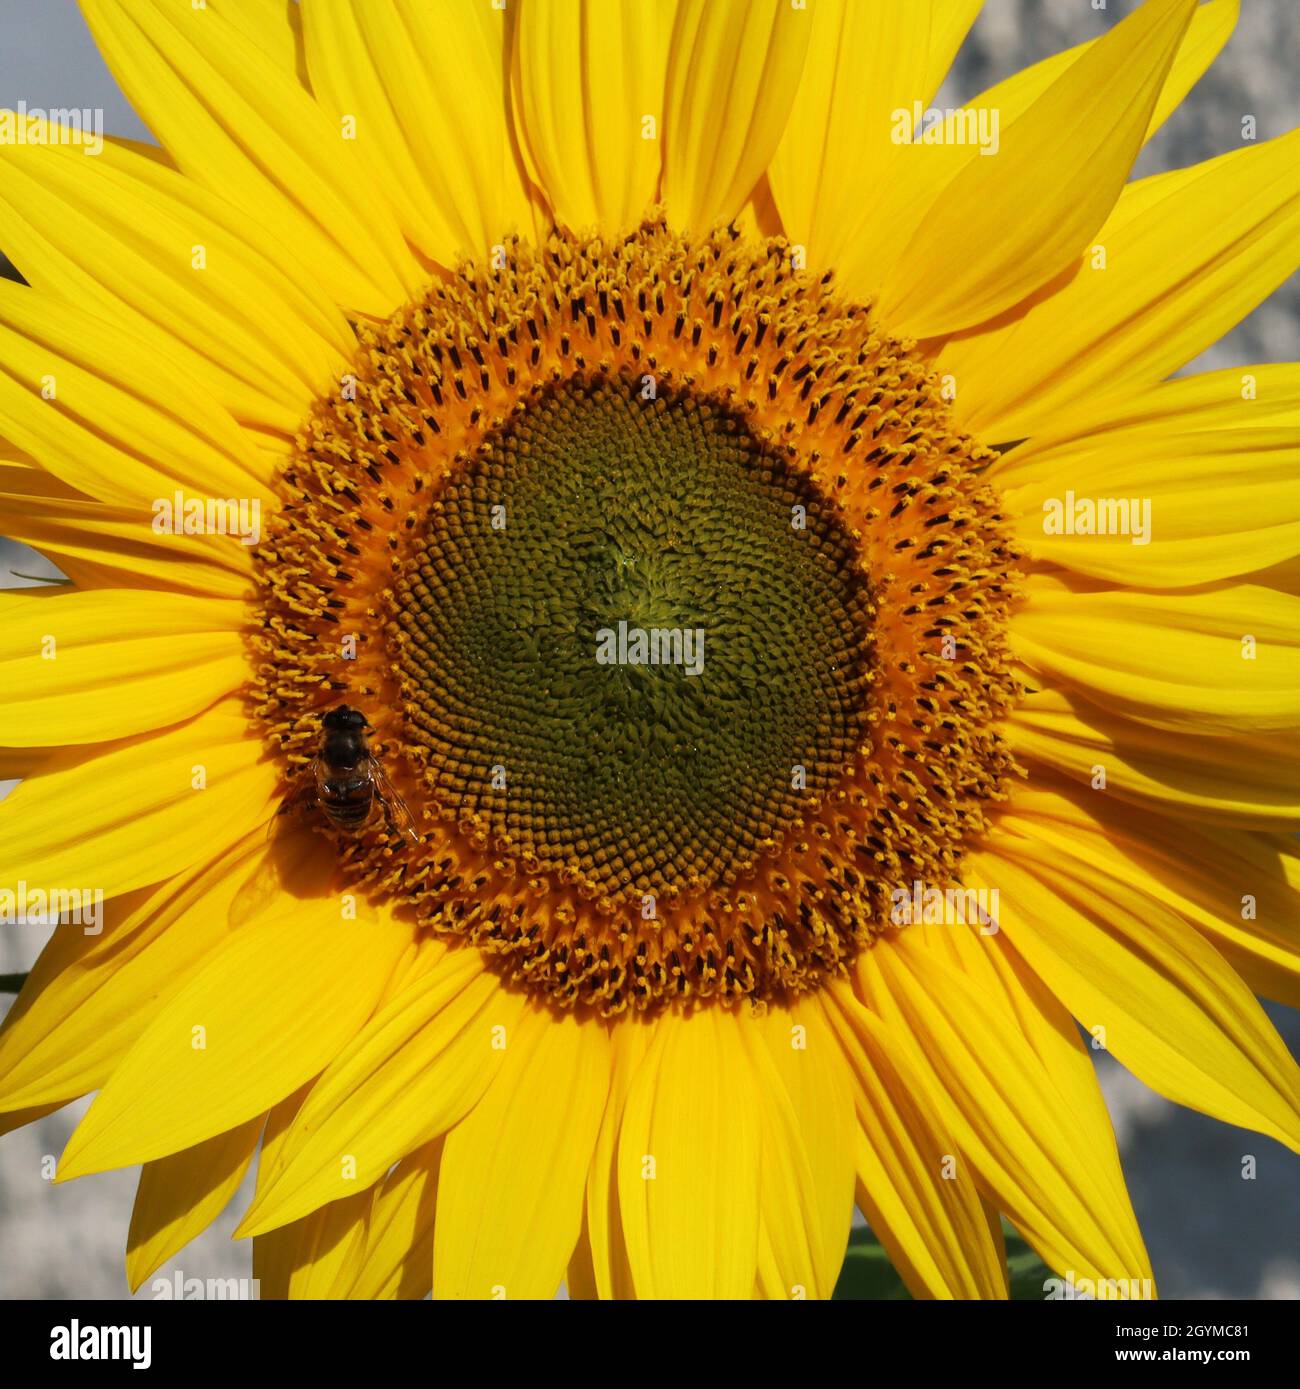 direct view into the beautiful bloom of a large yellow sunflower Stock Photo